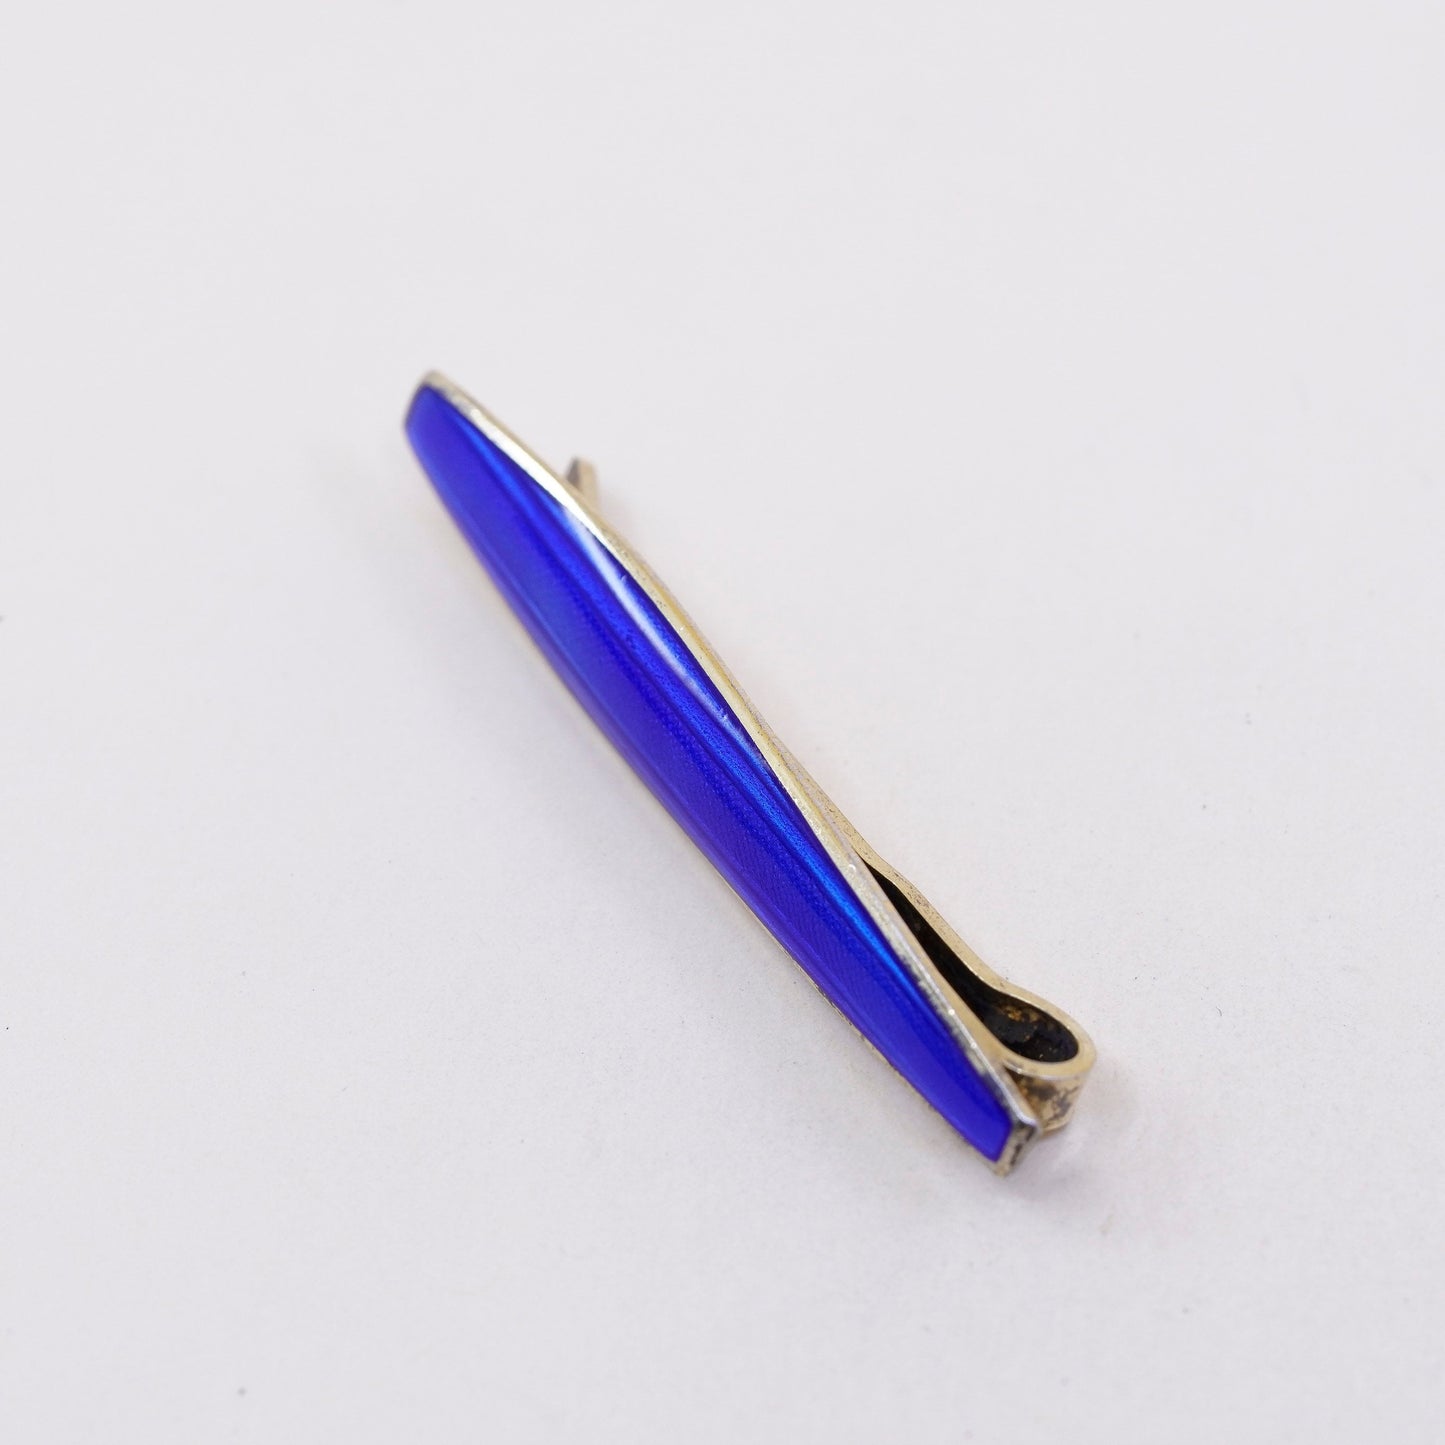 Norway gold over sterling silver tie clip, 925 tie clip with blue enamel